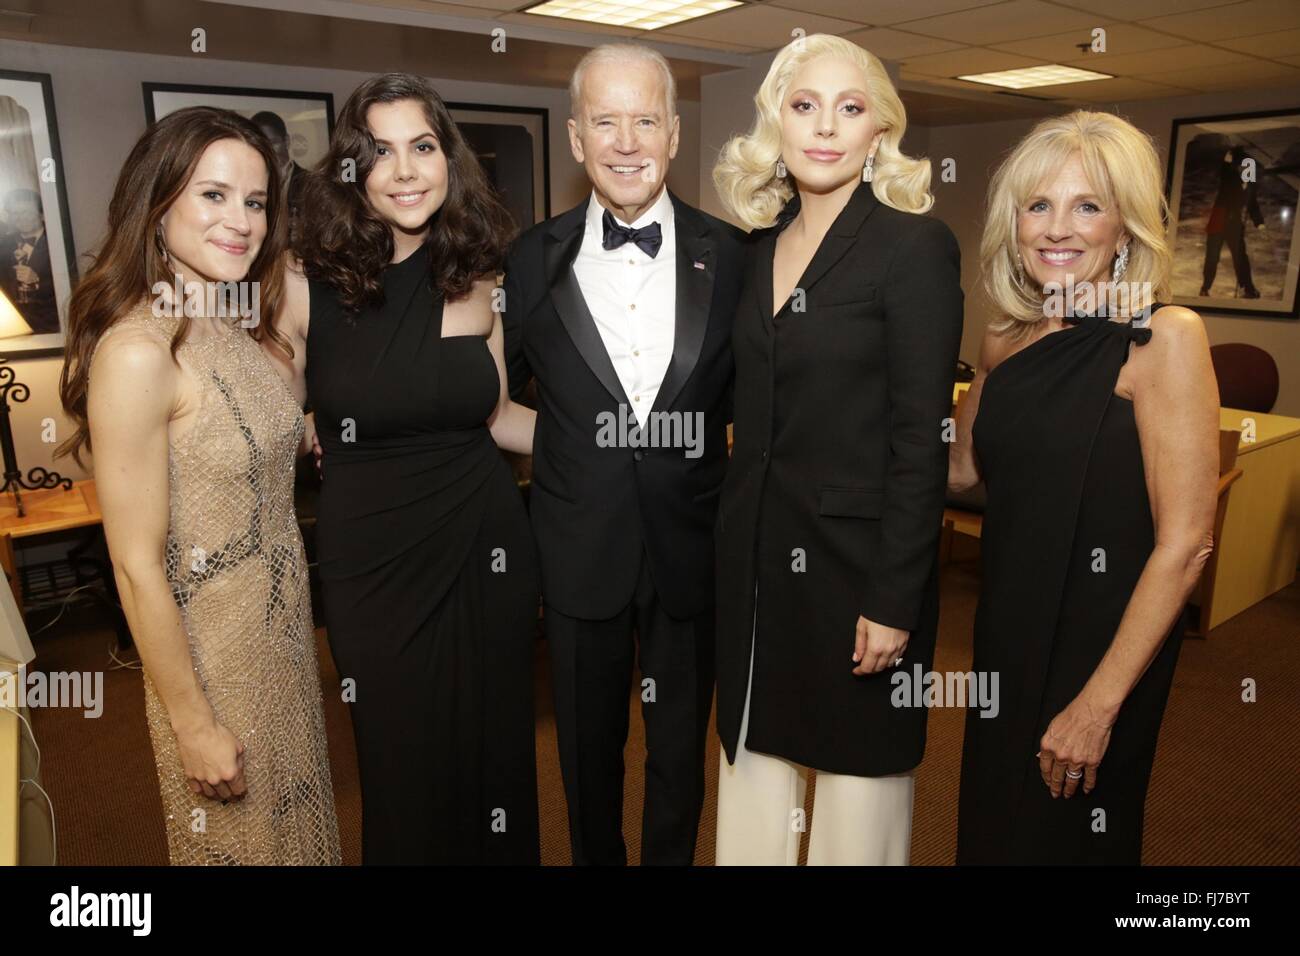 Los Angeles, USA. 28th Feb, 2016. U.S Vice President Joe Biden, center, poses with daughter Ashley Biden, left, Natali Germanotta, Lady Gaga and his wife Dr. Jill Biden backstage during the 88th Academy Awards ceremony February 28, 2016 in Los Angeles, California. Stock Photo